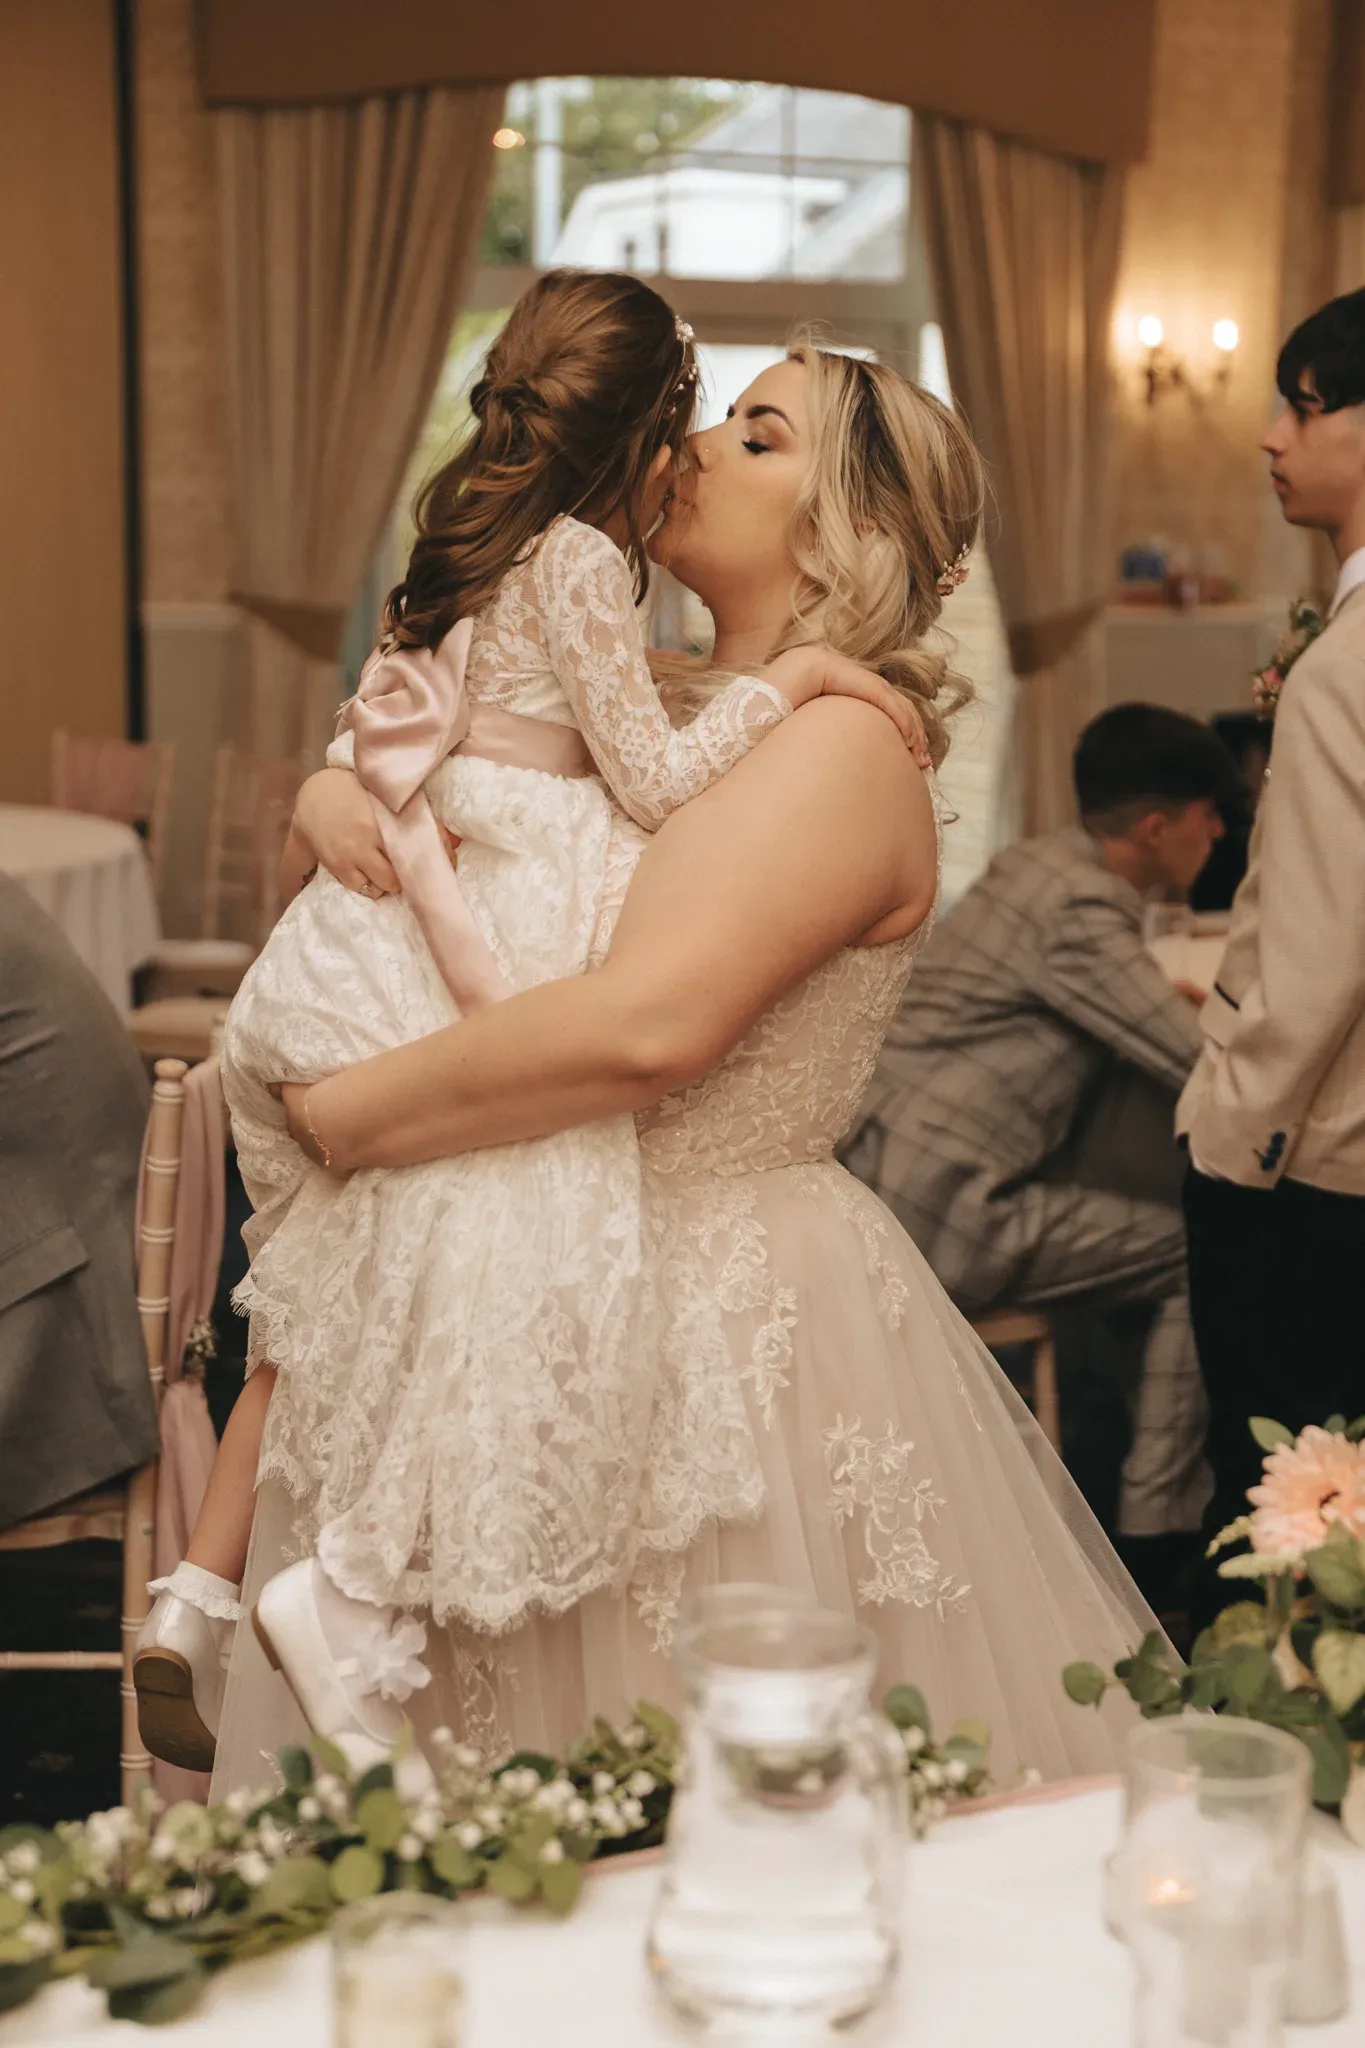 A bride in a lace gown lovingly lifts and kisses a young girl in a white lace dress at a wedding reception, surrounded by floral decorations and guests.